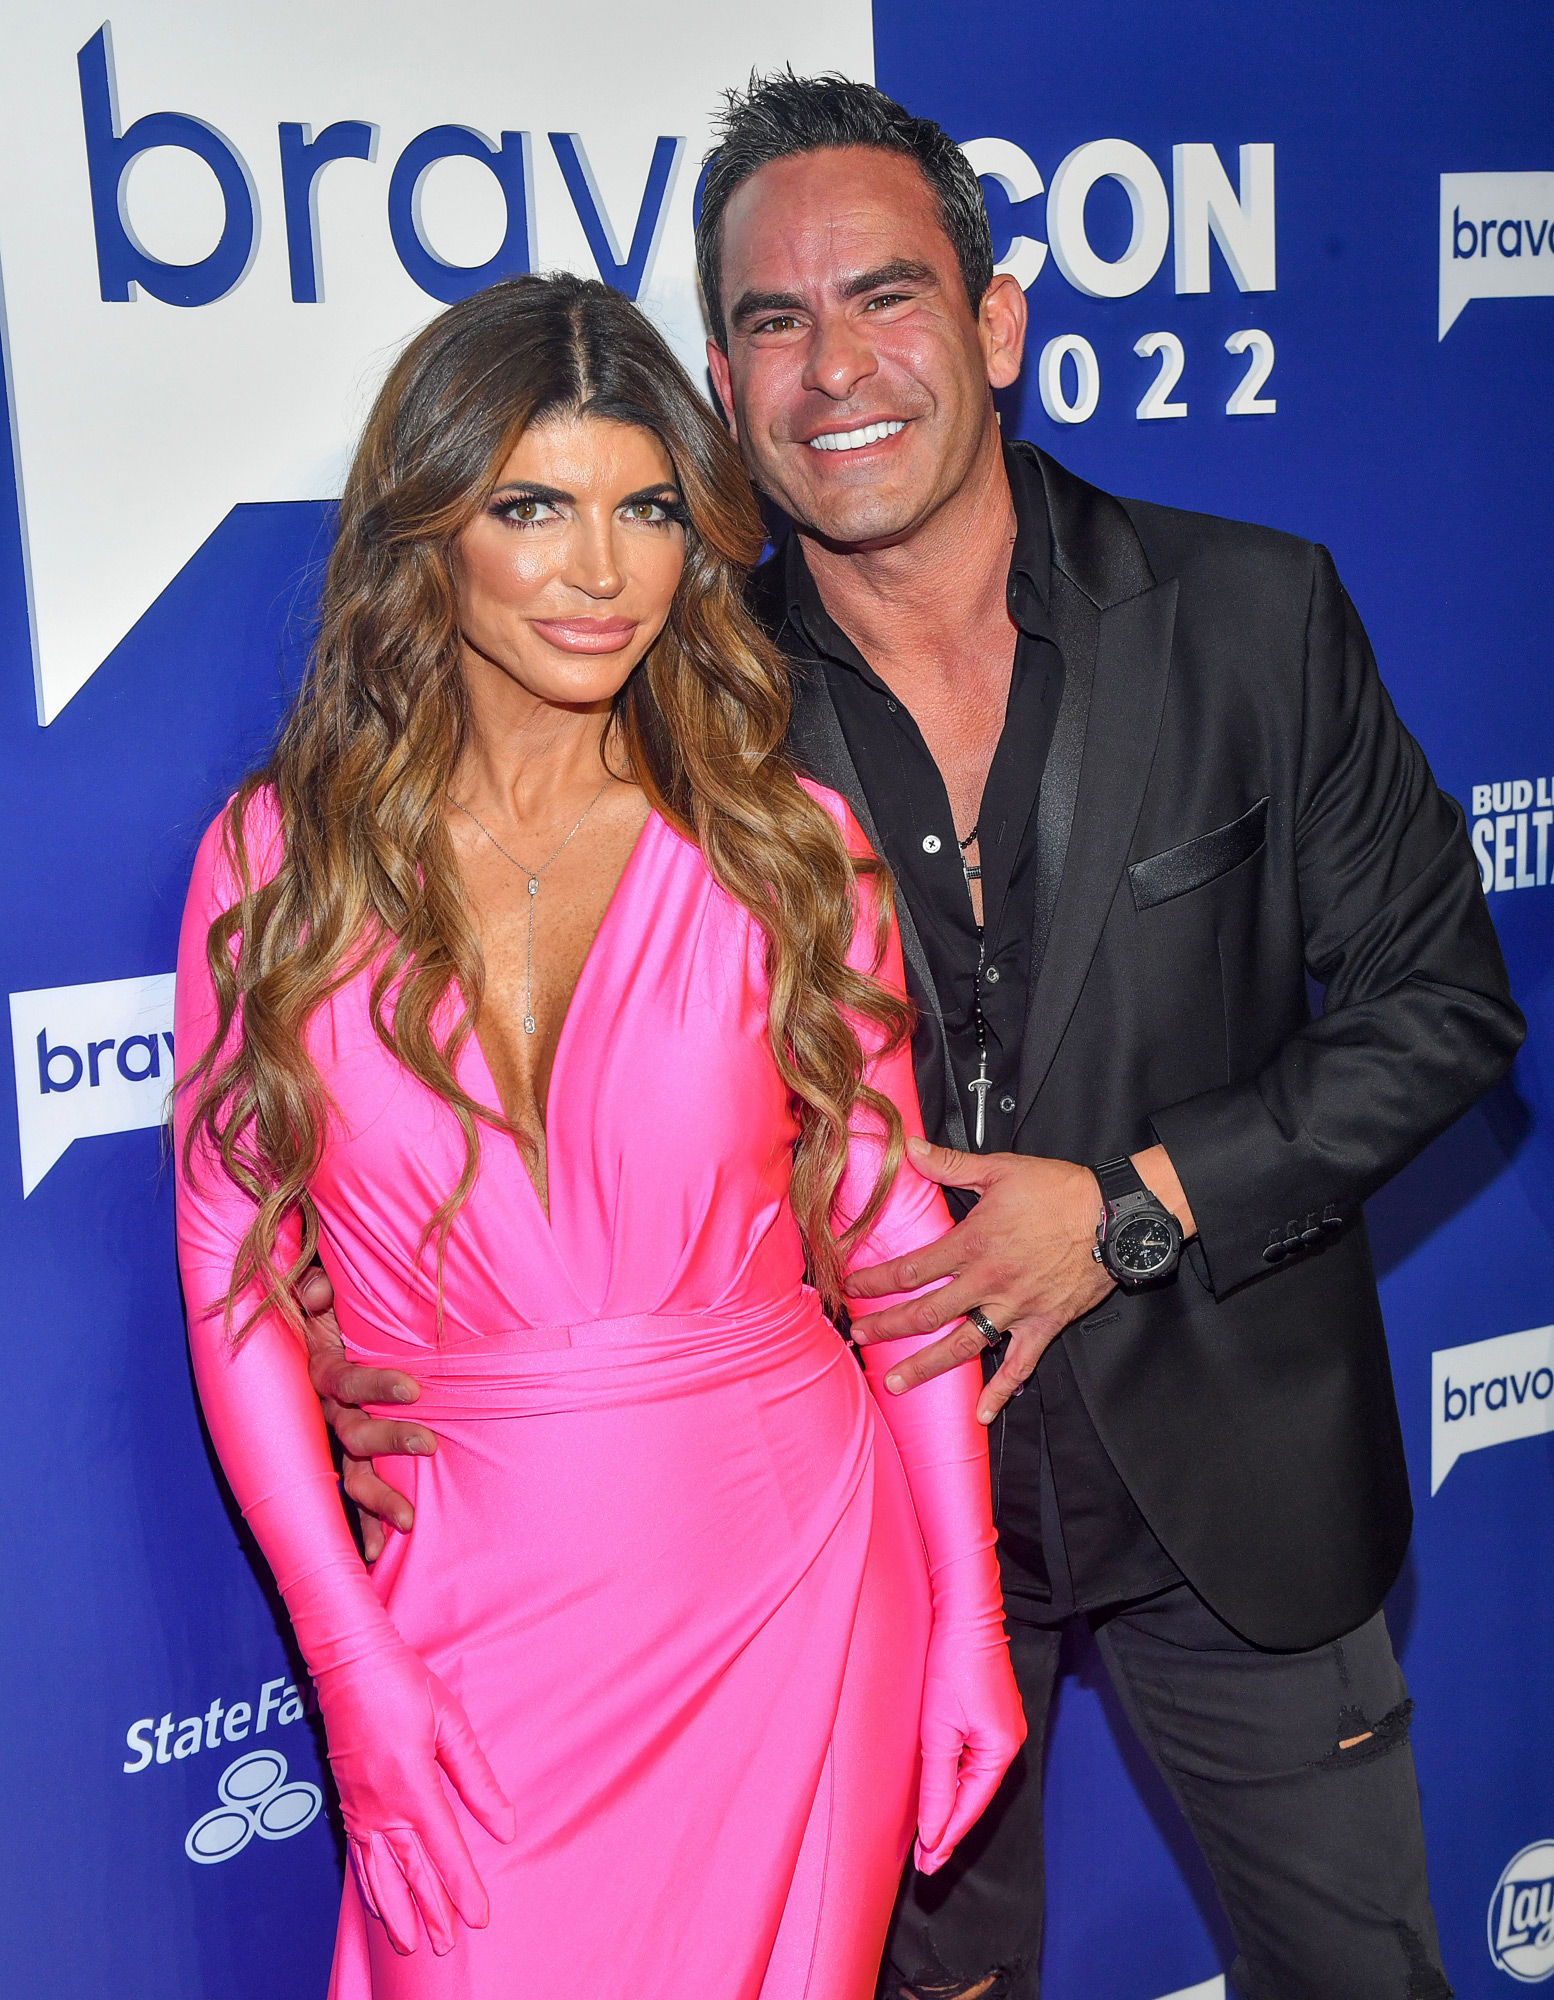 Teresa Giudice The Only Hard Thing About 1st Year of Marriage With Louie Ruelas Was The Real Housewives of New Jersey